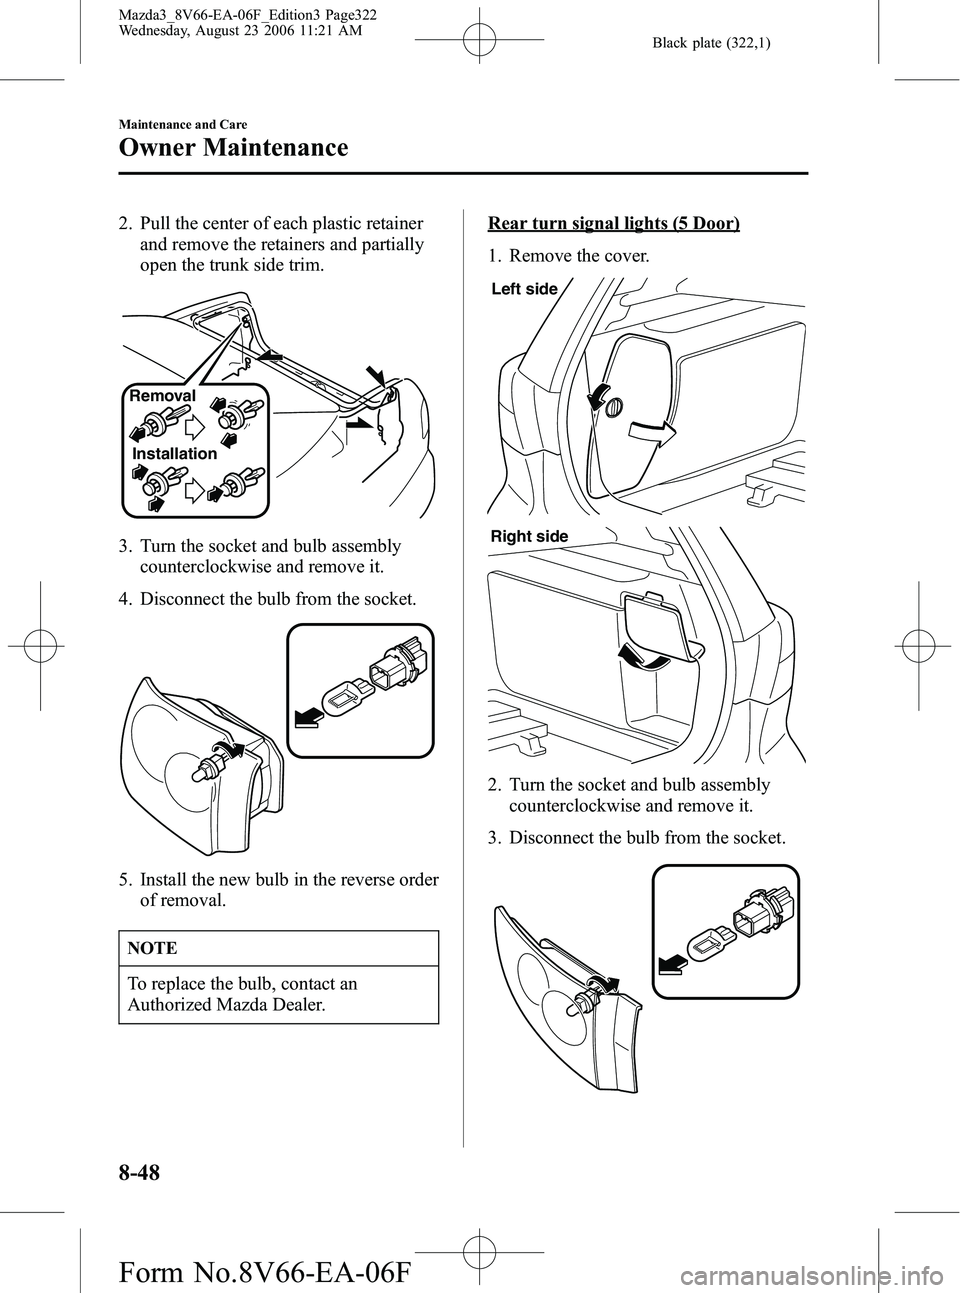 MAZDA MODEL 3 5-DOOR 2007  Owners Manual Black plate (322,1)
2. Pull the center of each plastic retainerand remove the retainers and partially
open the trunk side trim.
Removal
Installation
3. Turn the socket and bulb assembly counterclockwi